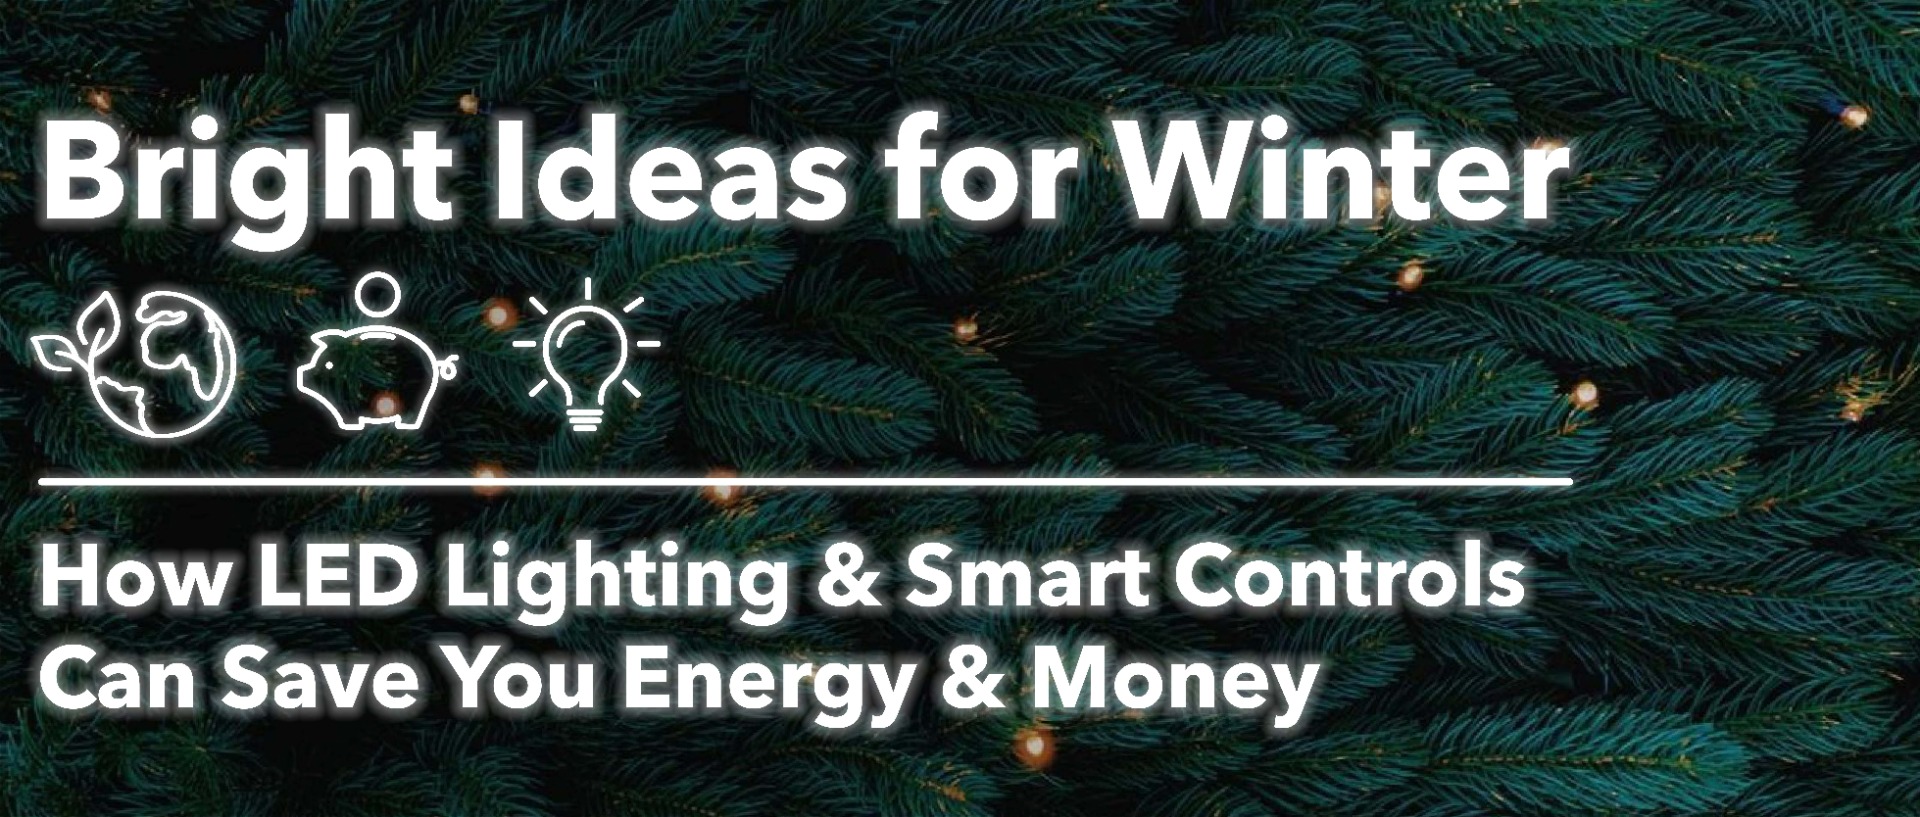 how led lighting and smaert controls can reduce your energy bills this winter